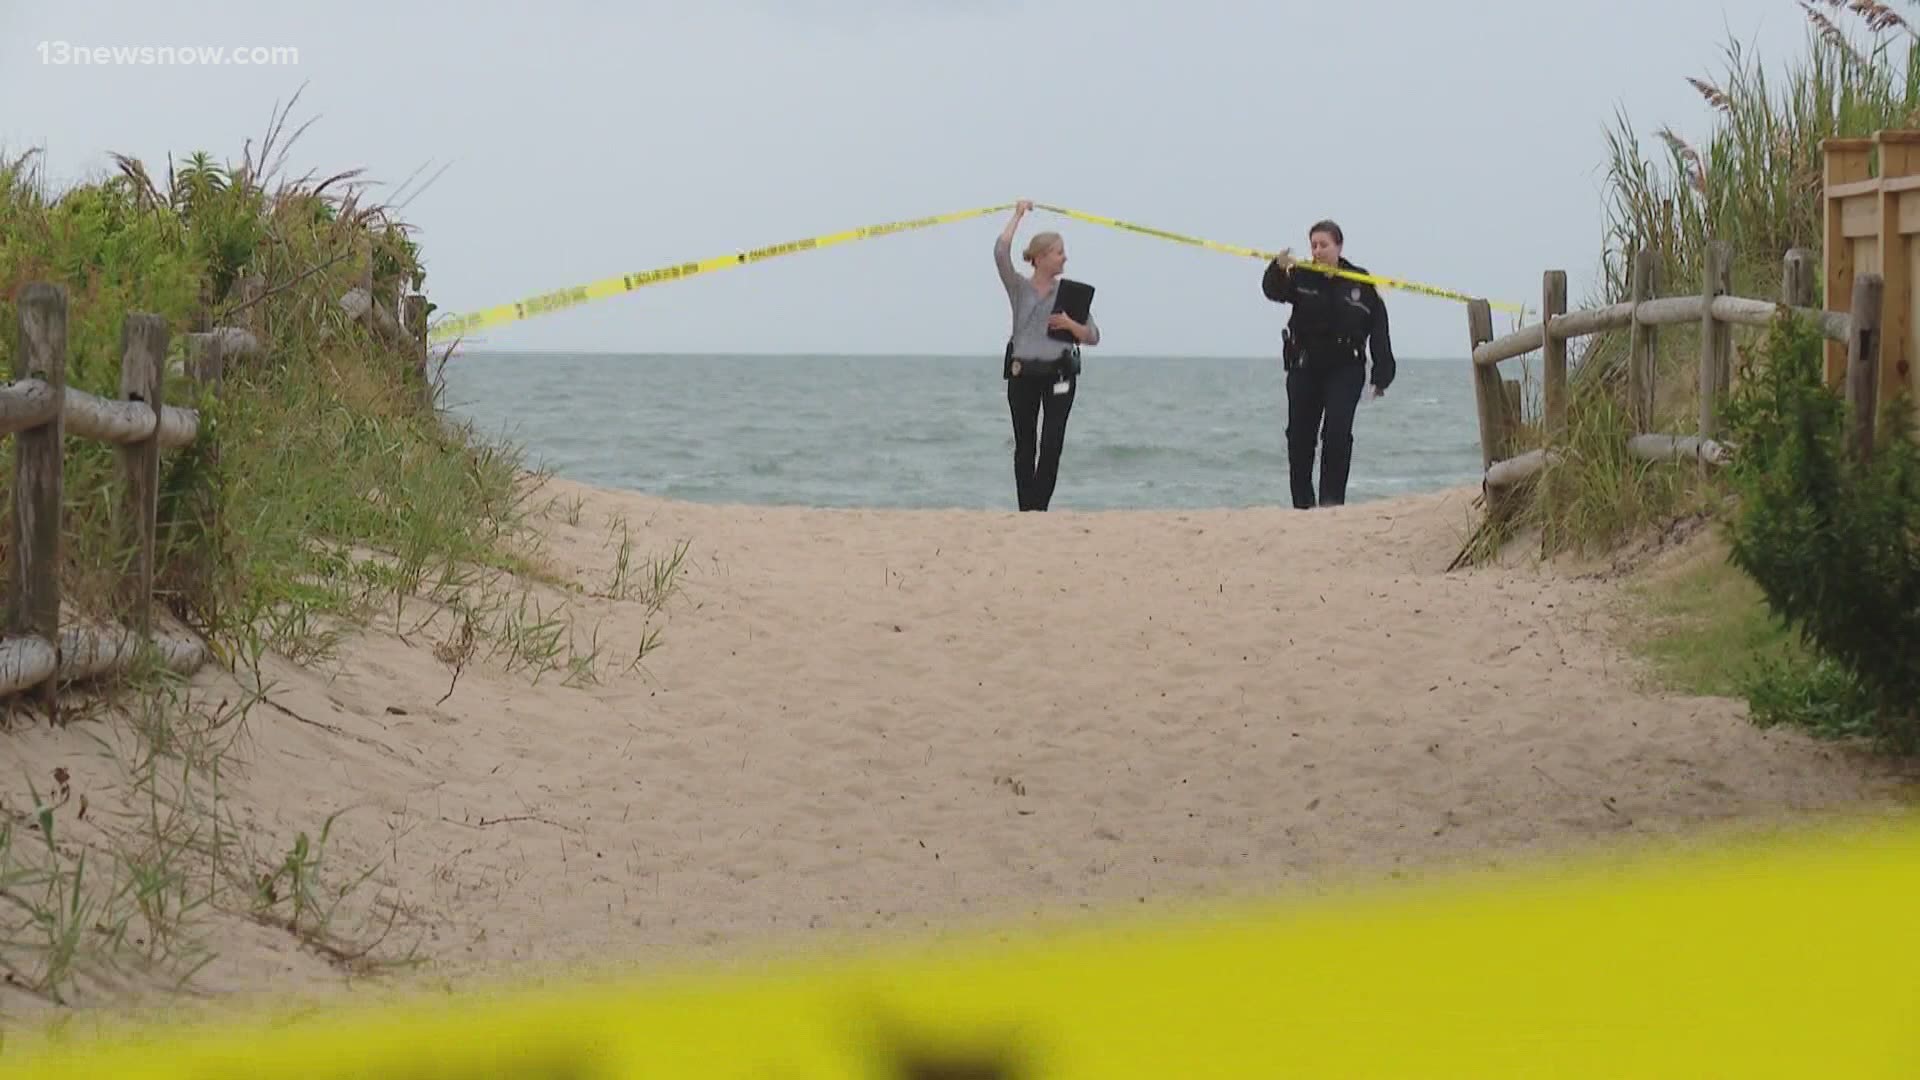 Police said that someone found a man's body on the sand along part of South Atlantic Avenue. Officers believe a surfer drowned and his body washed ashore.